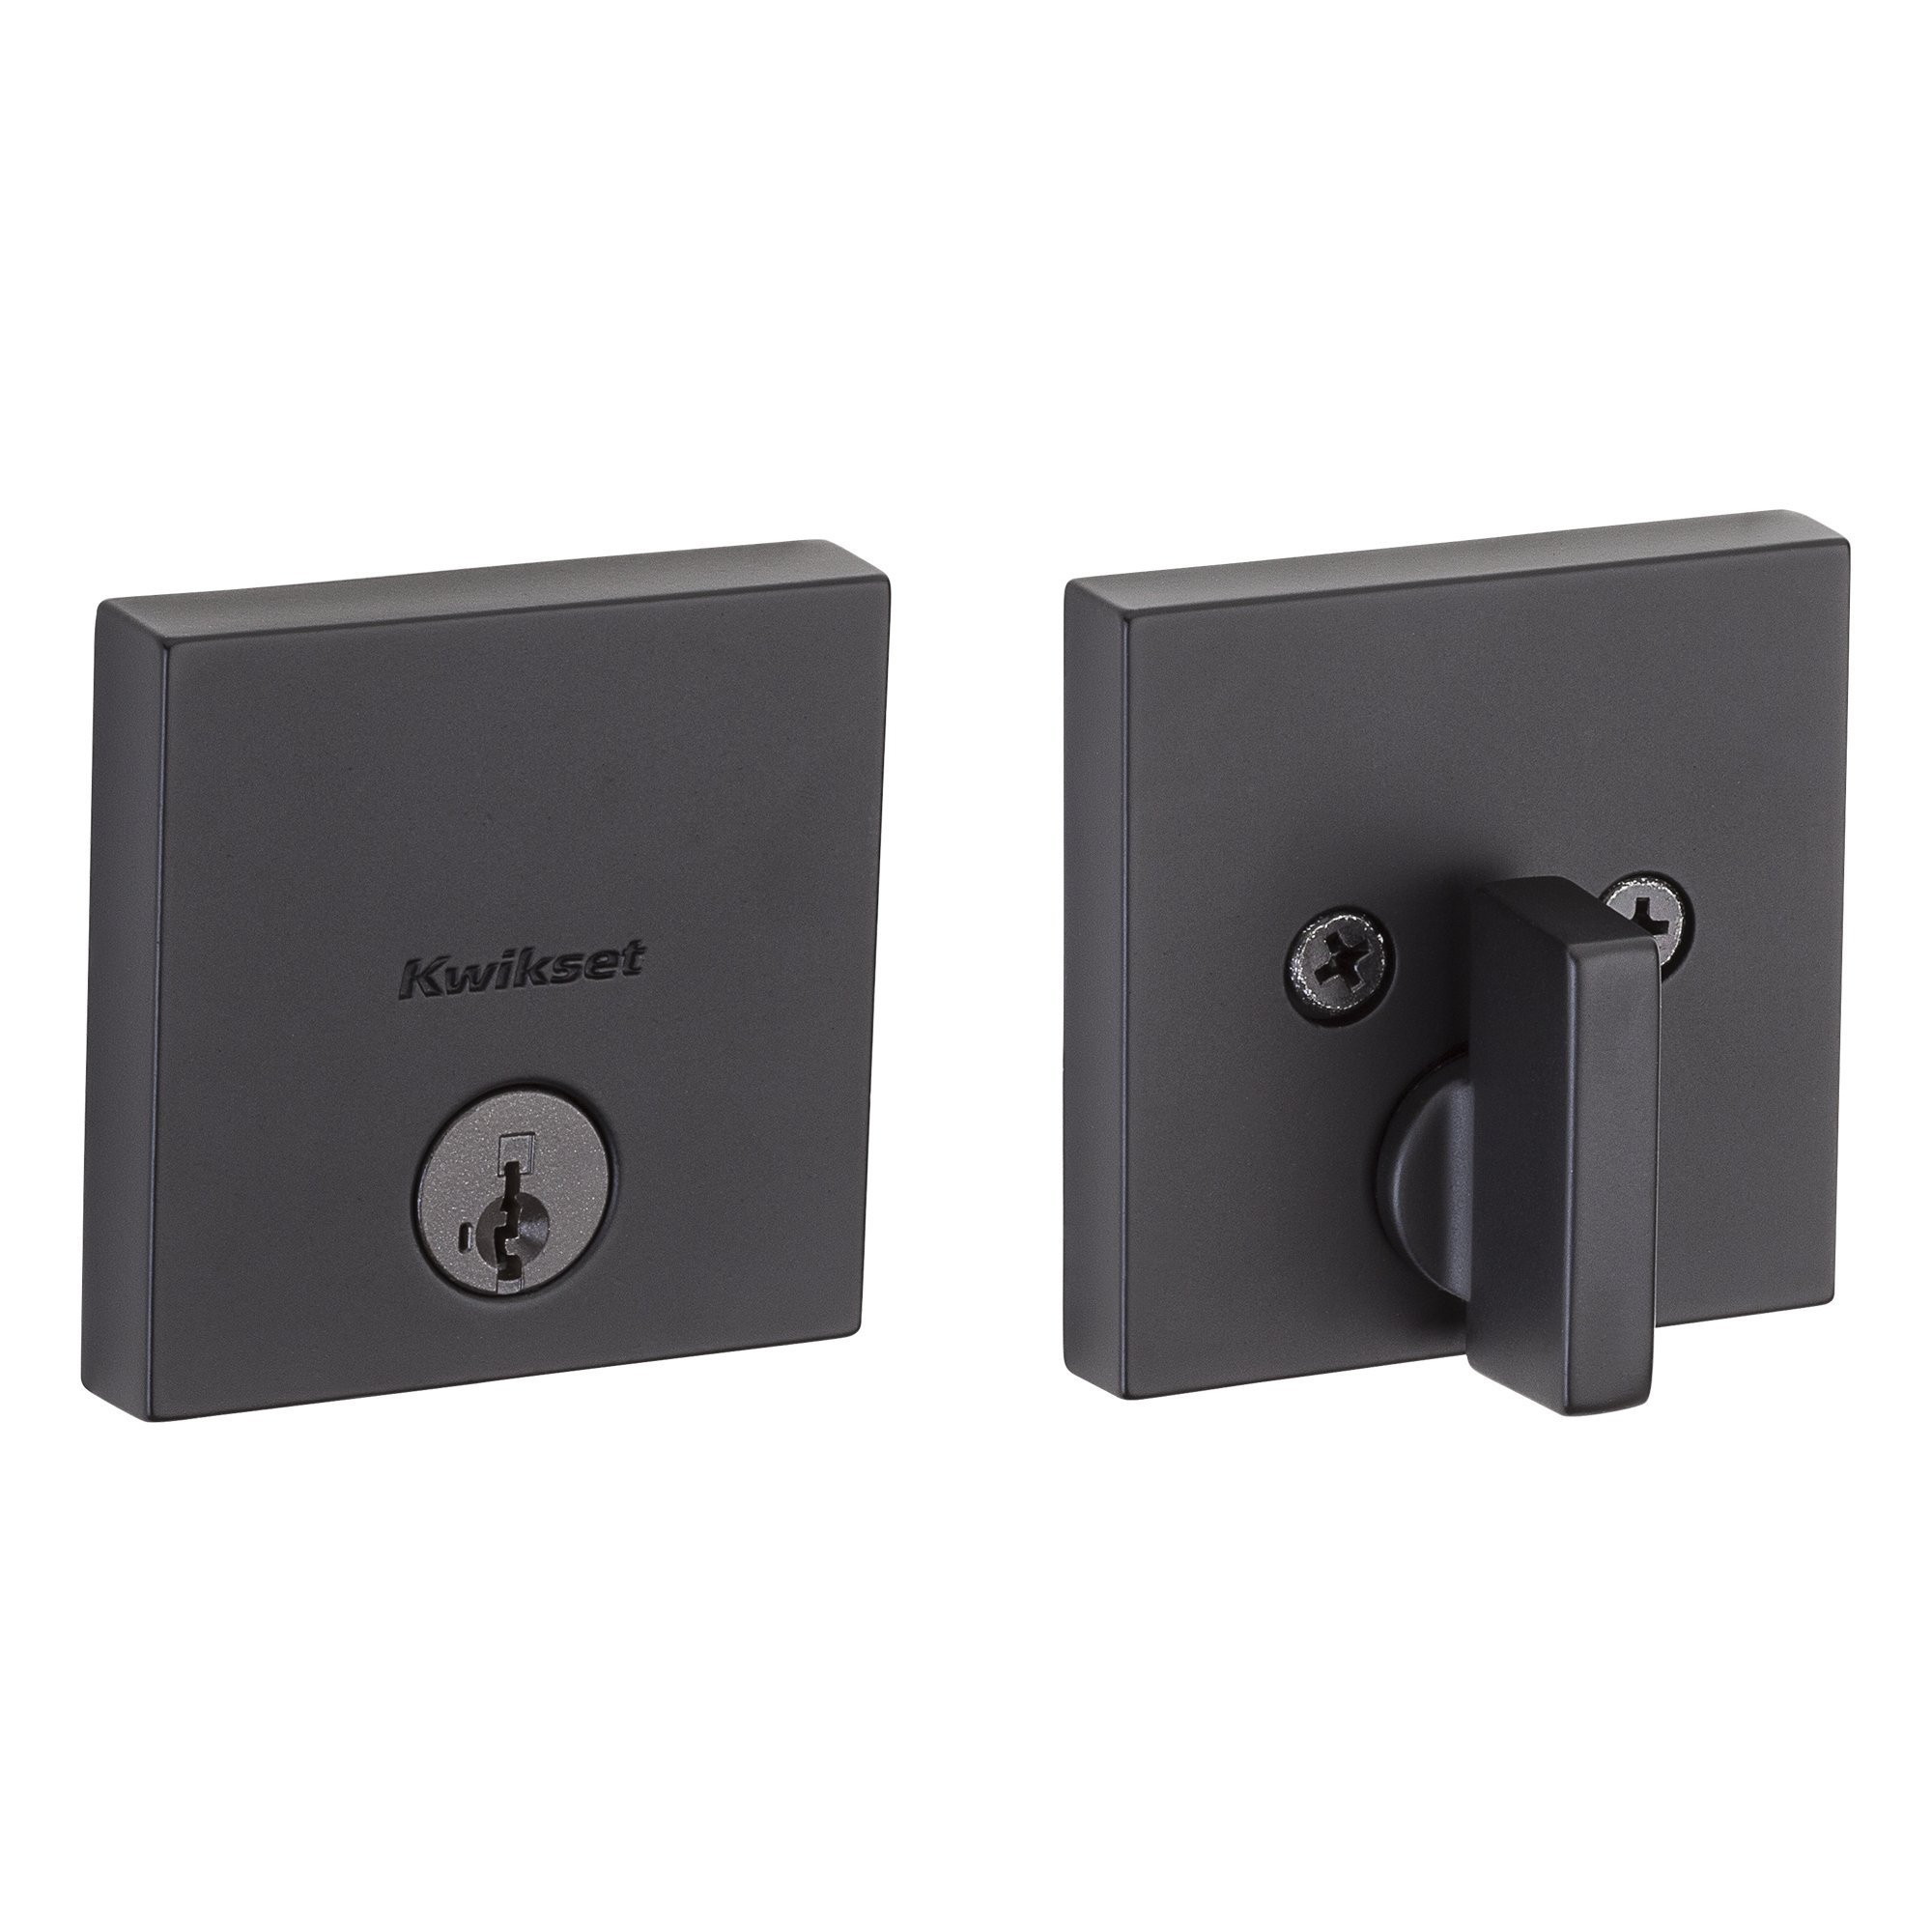 Book Cover Kwikset 92580-008 258 Downtown Low Profile Slim Square Modern Contemporary Single Cylinder Deadbolt Door Lock featuring SmartKey Security in Iron Black Square Iron Black